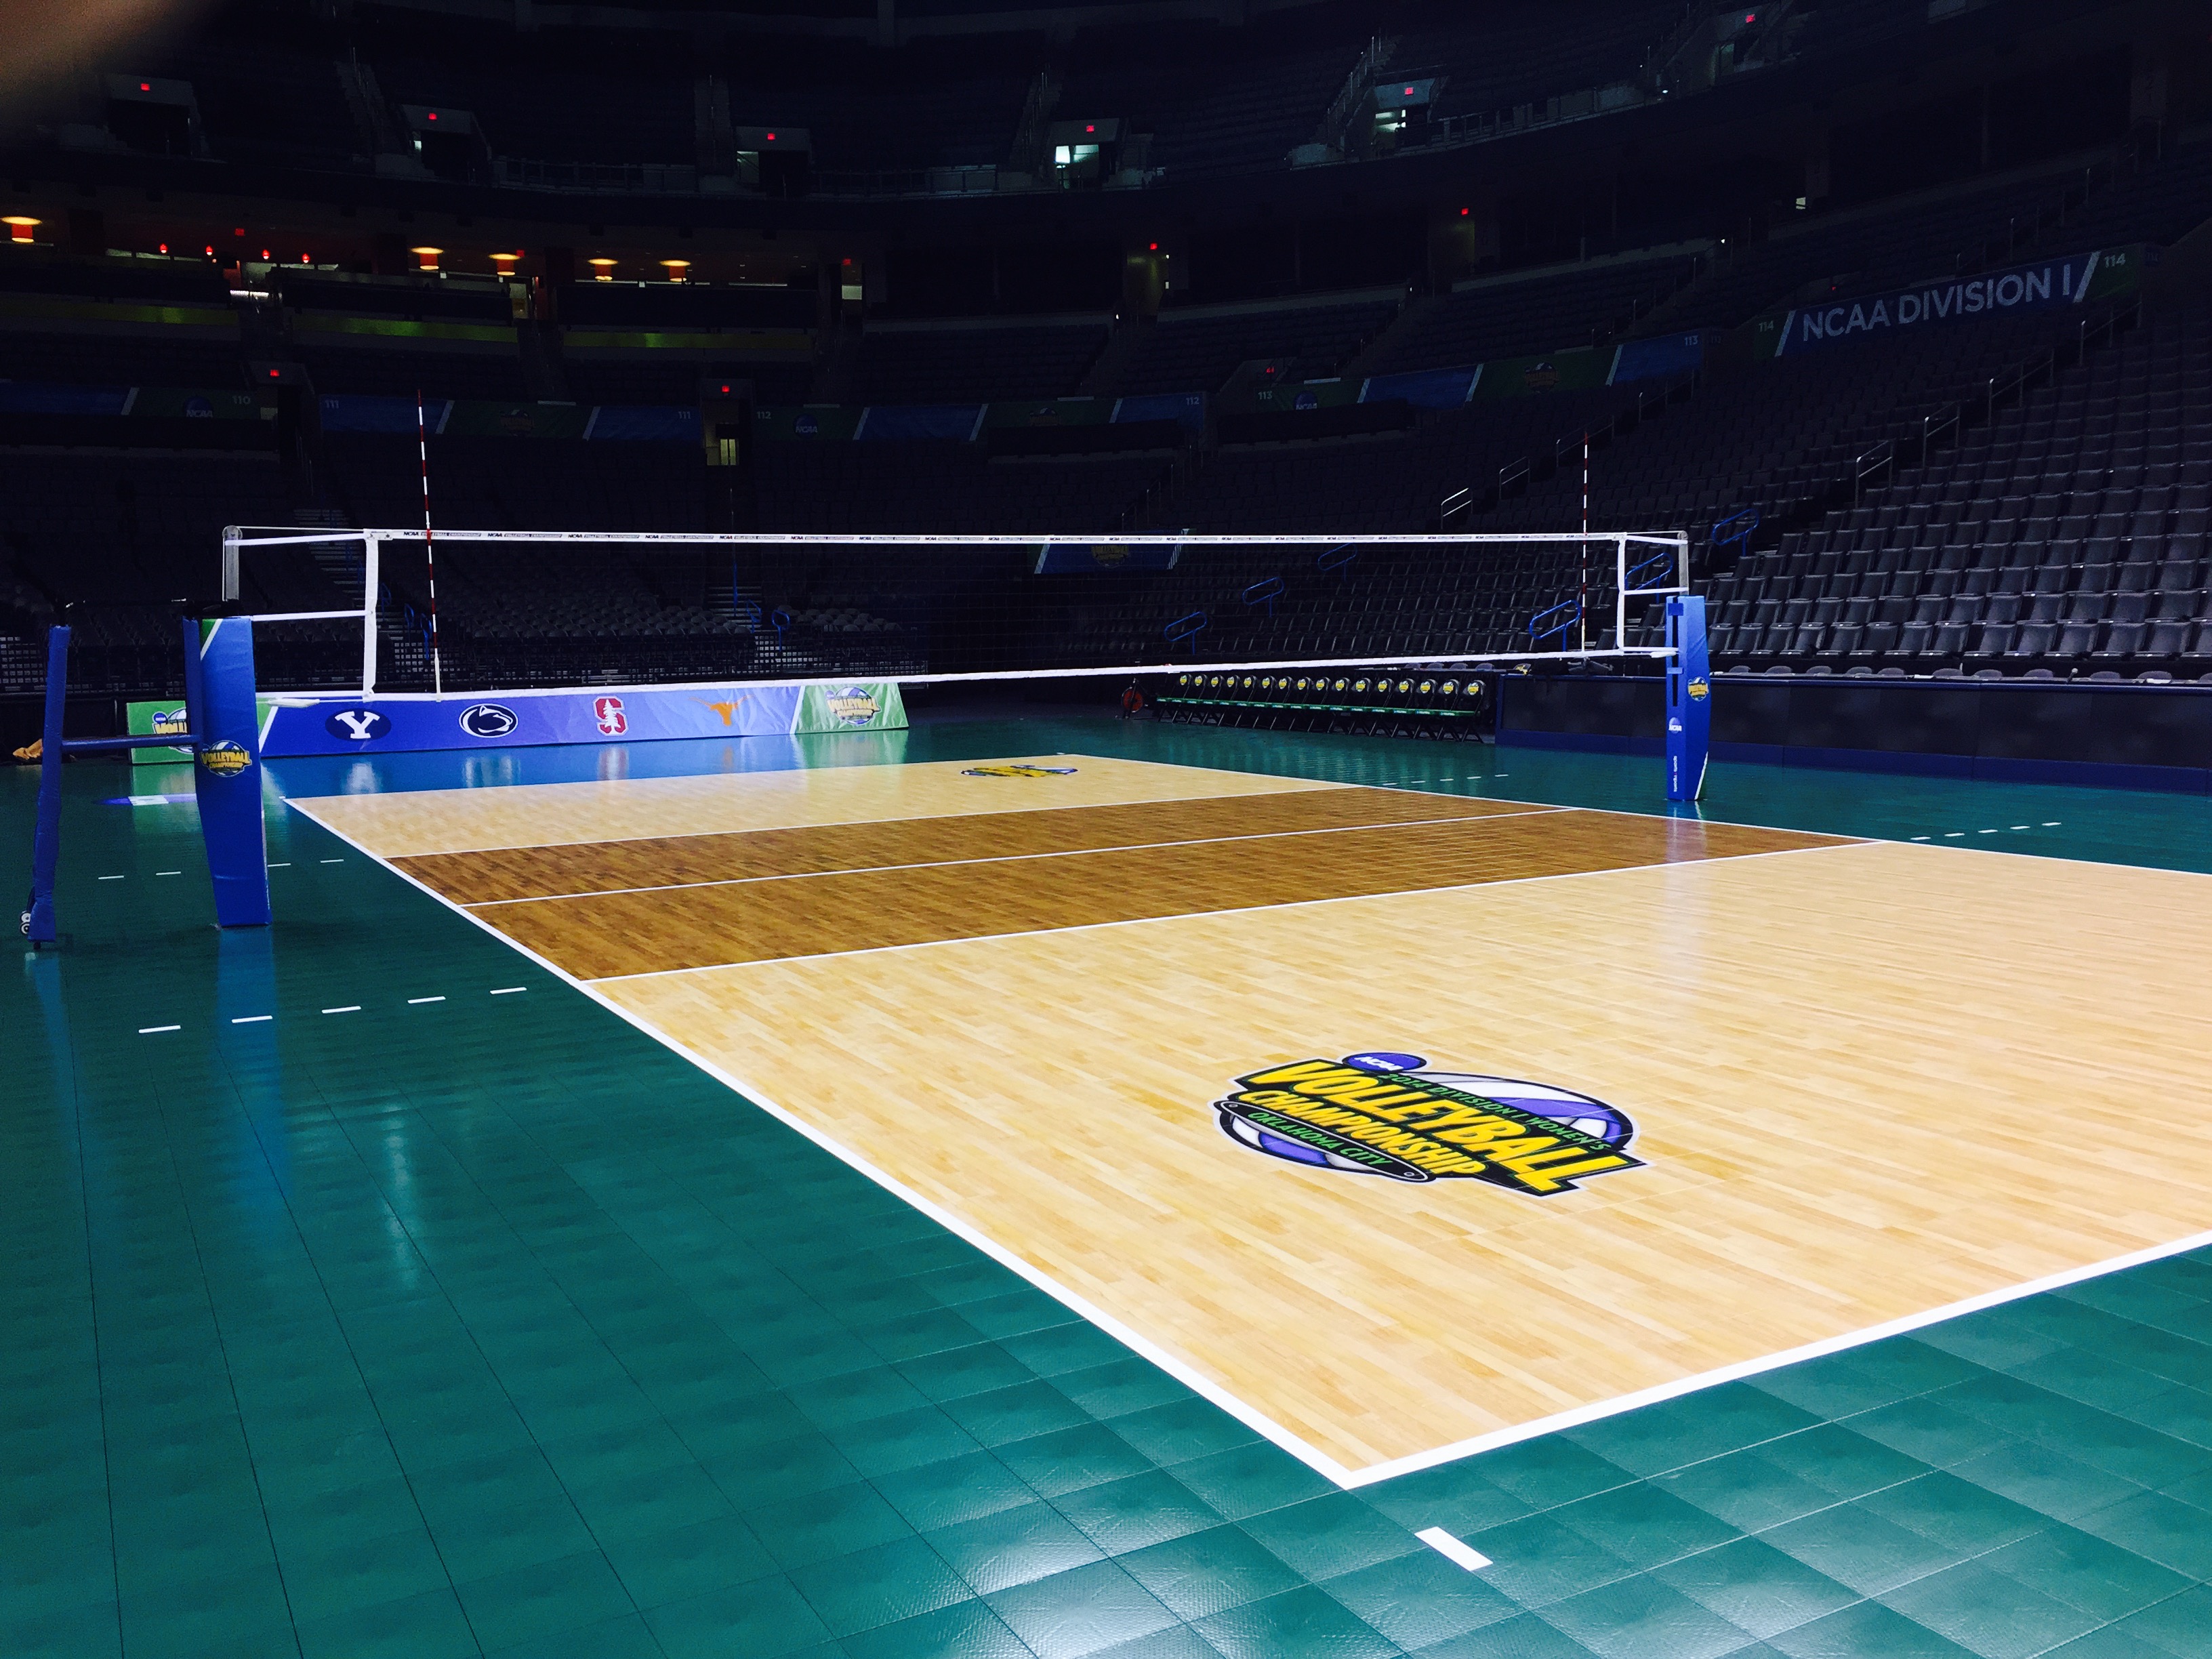 Sport Court® is the Official Court Supplier for 2014 NCAA® Division I